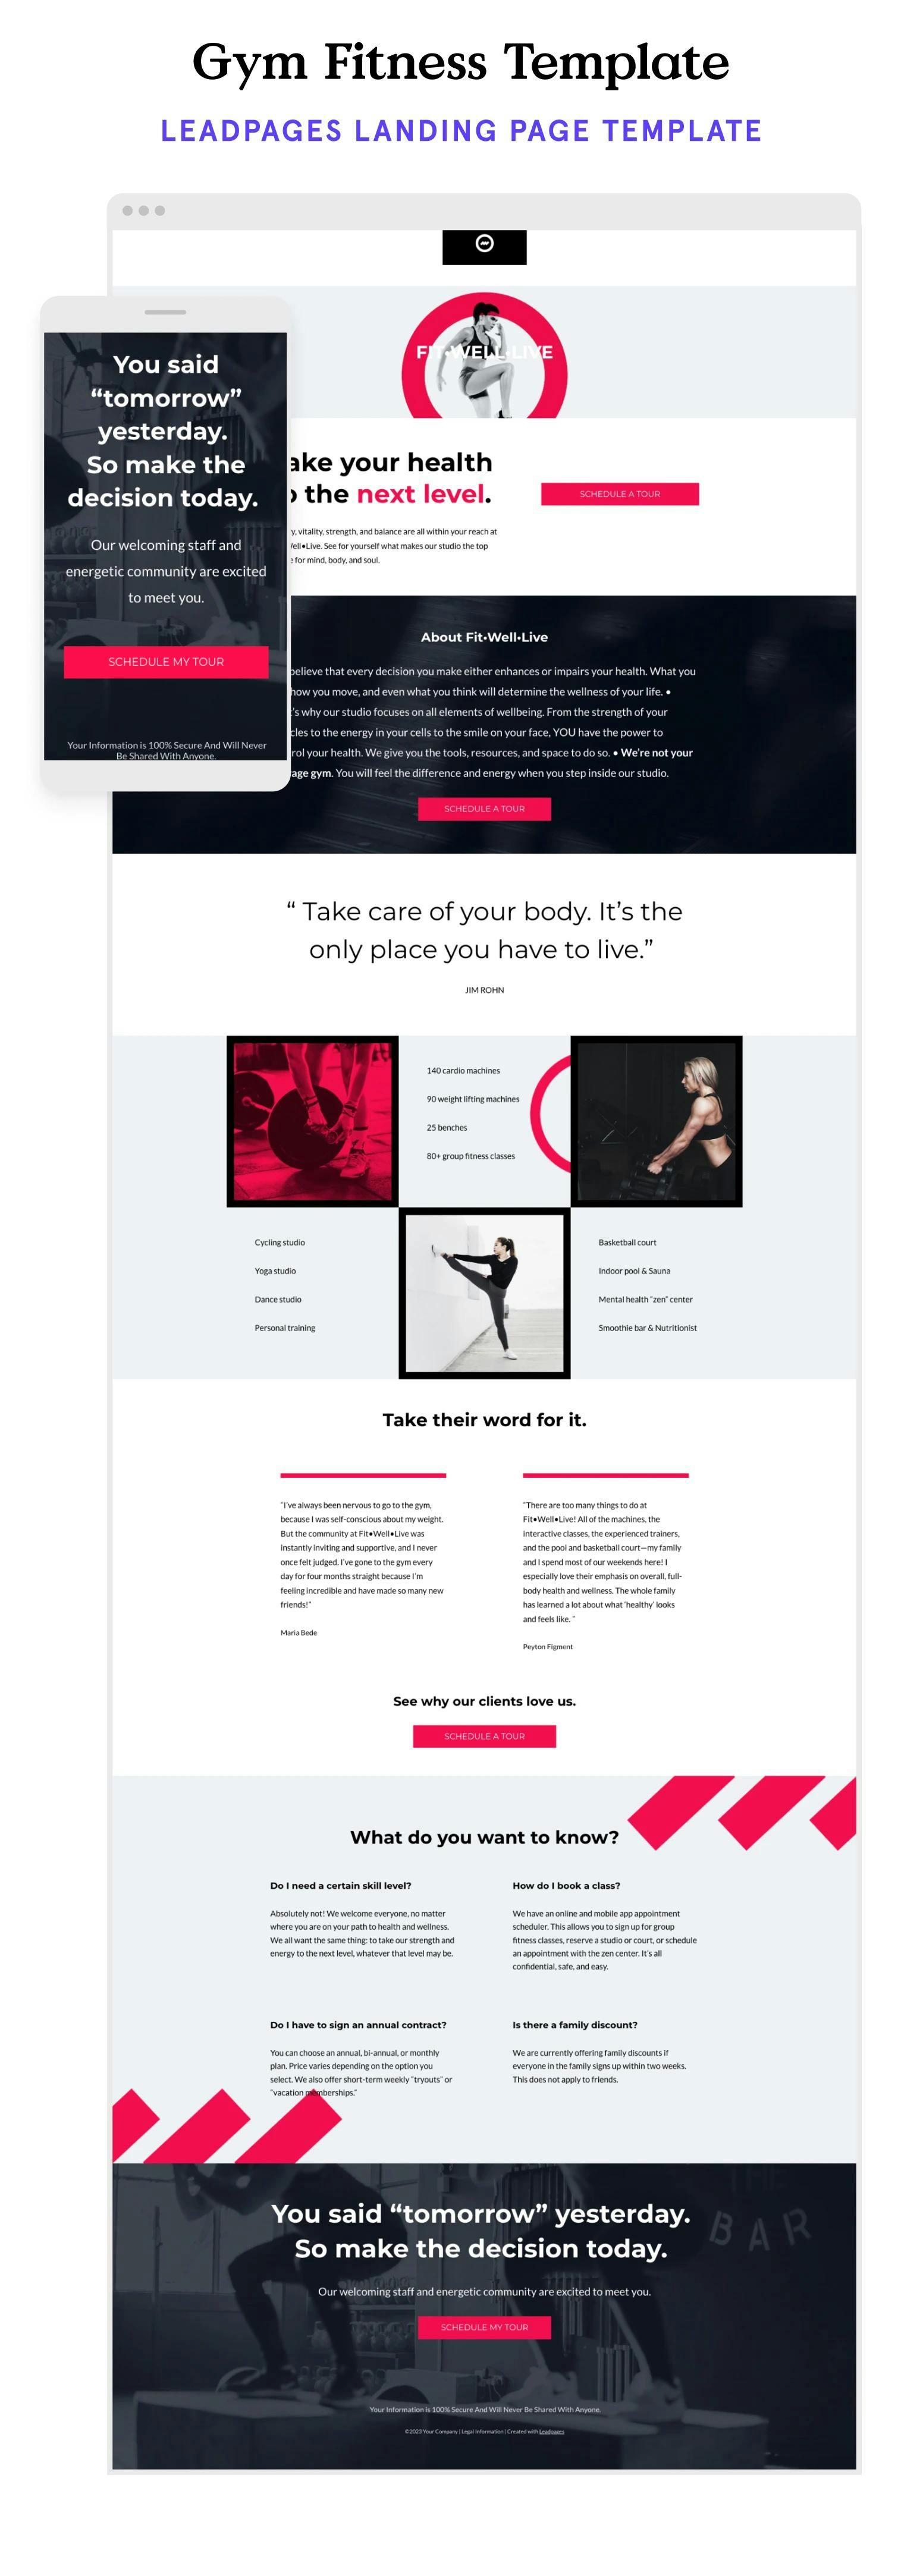 Gym fitness landing page template